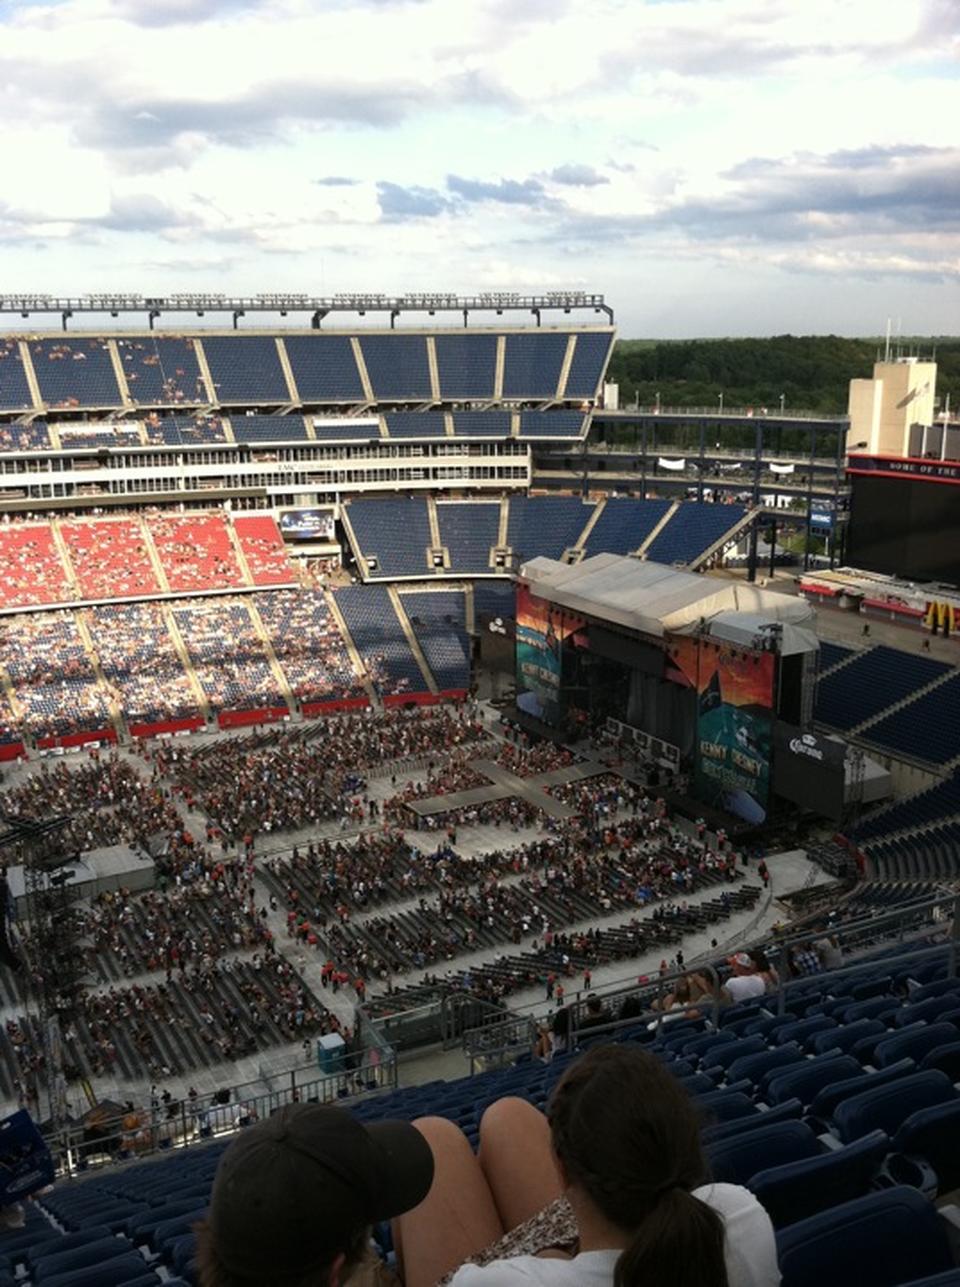 section 331, row 14 seat view  for concert - gillette stadium